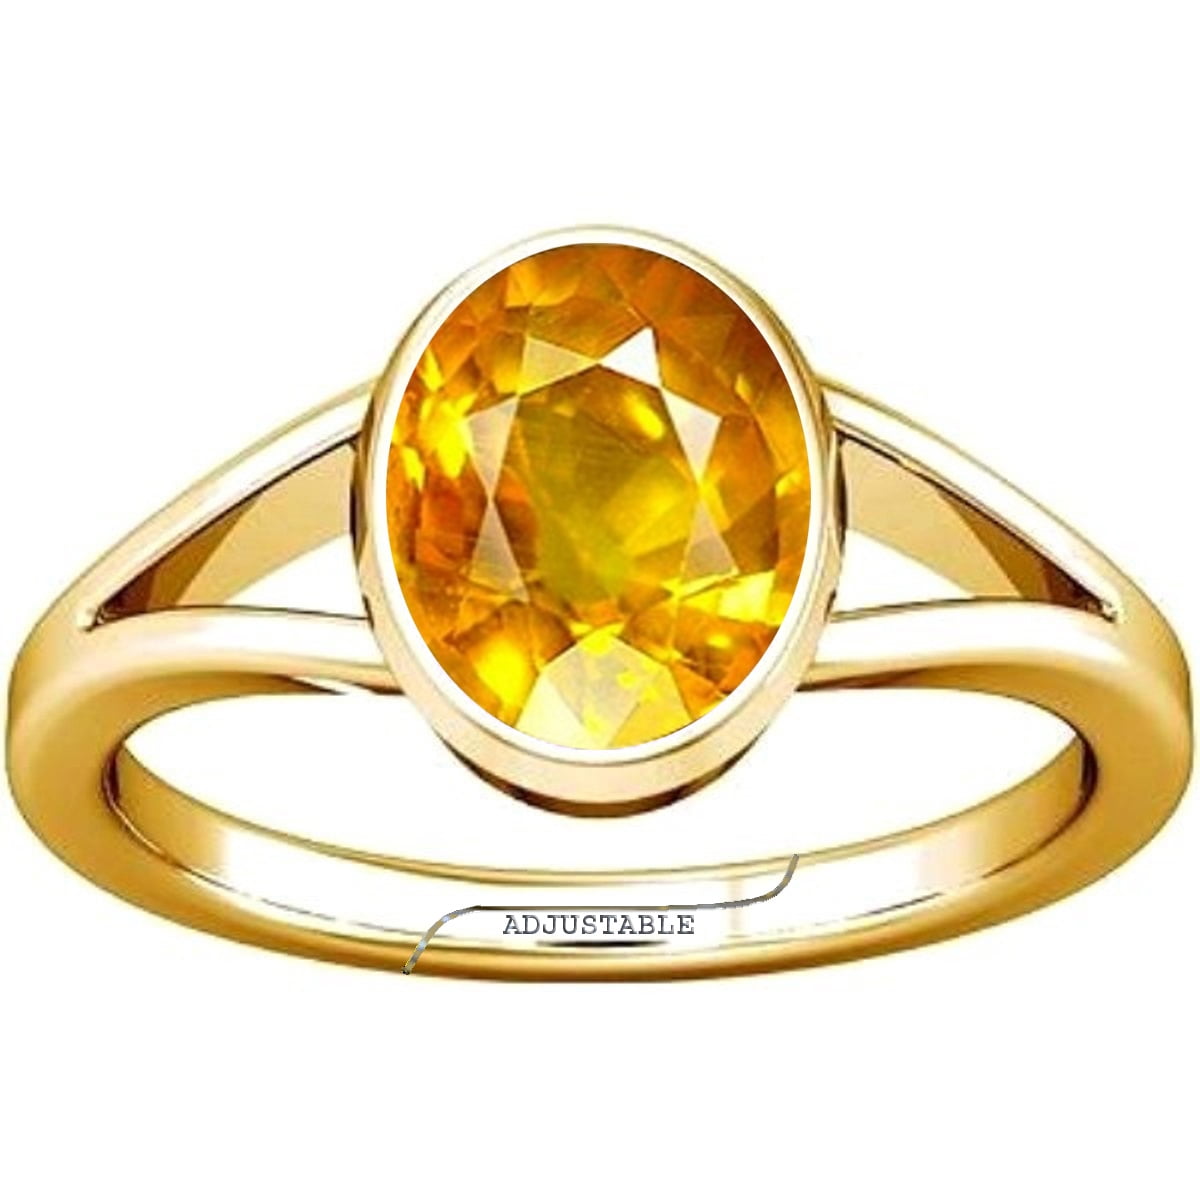 APSSTONE 9.50 Carat Yellow Sapphire Stone Inspired Ring Adjustable Gold Ring  For Women Metal Gold Plated Ring Price in India - Buy APSSTONE 9.50 Carat Yellow  Sapphire Stone Inspired Ring Adjustable Gold